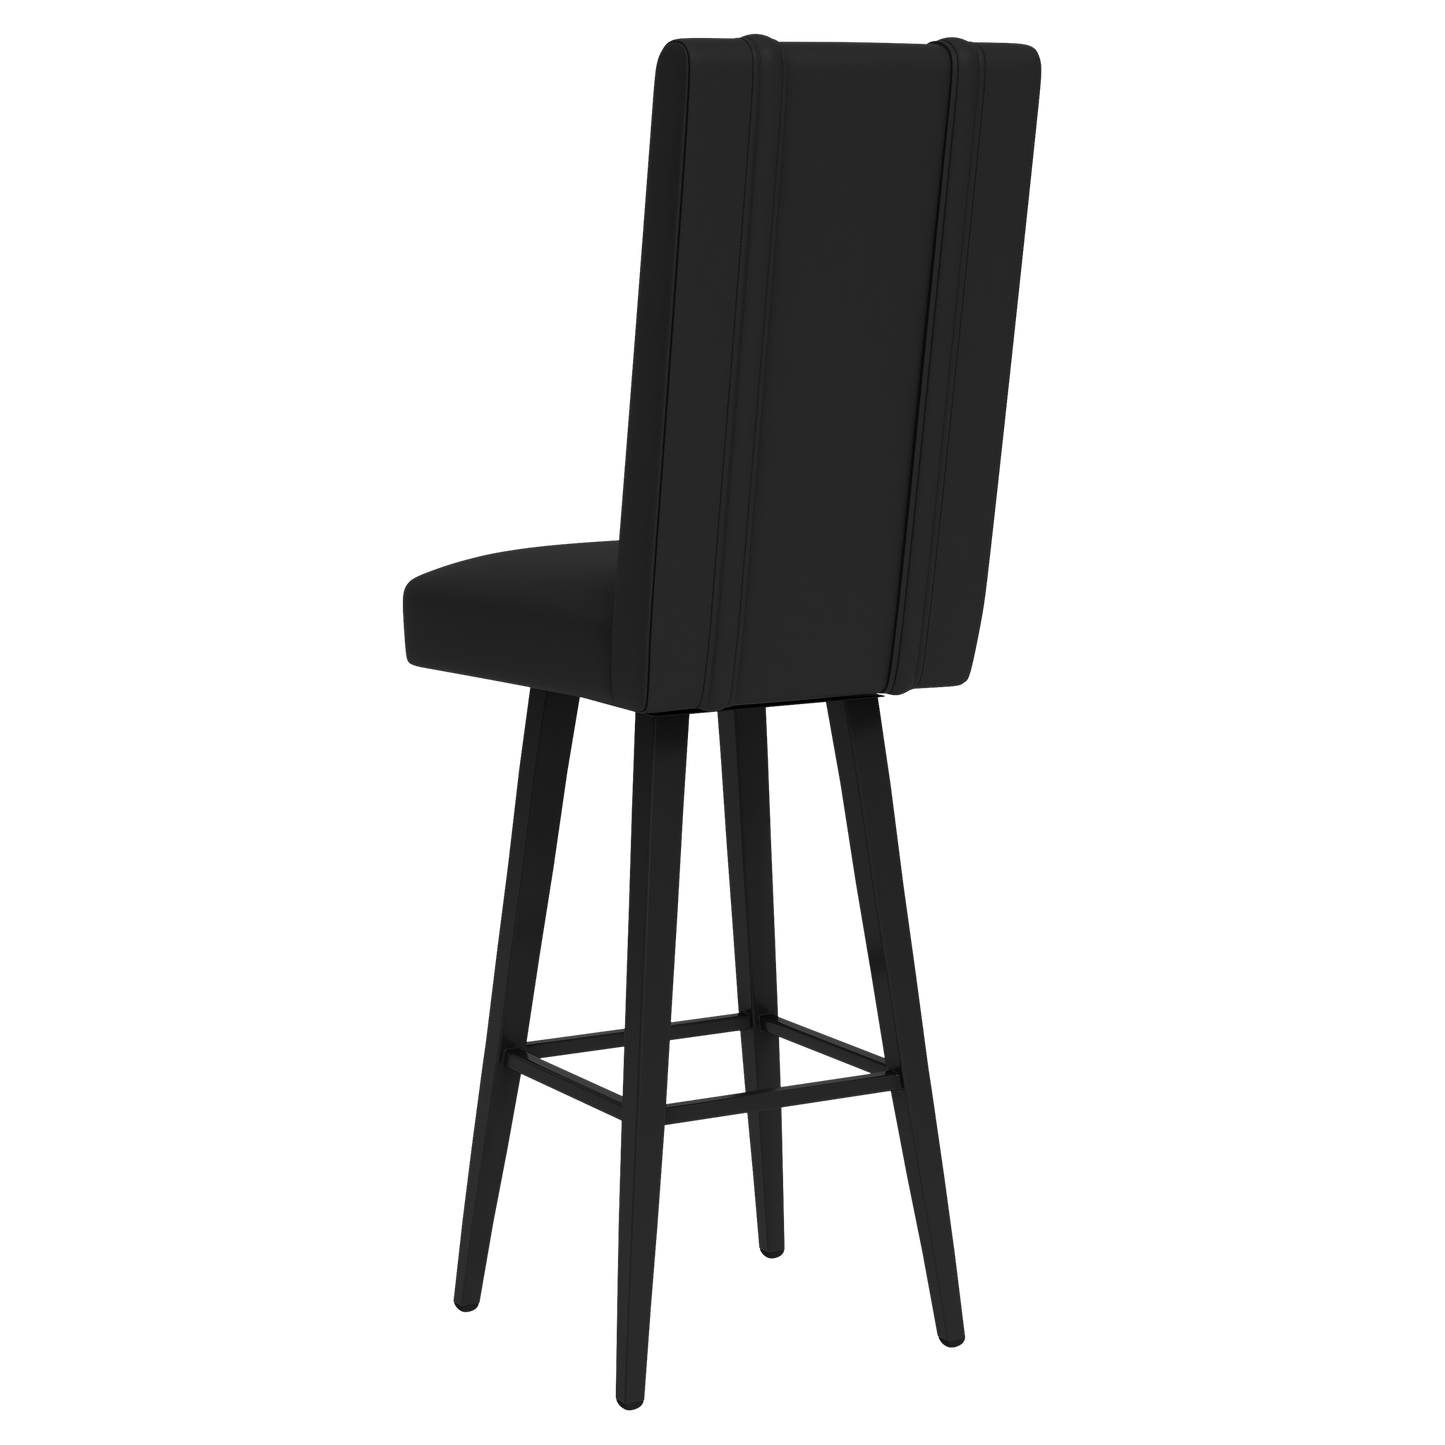 Swivel Bar Stool 2000 with Bucks Gaming Global Logo [Can Only Be Shipped to Wisconsin]